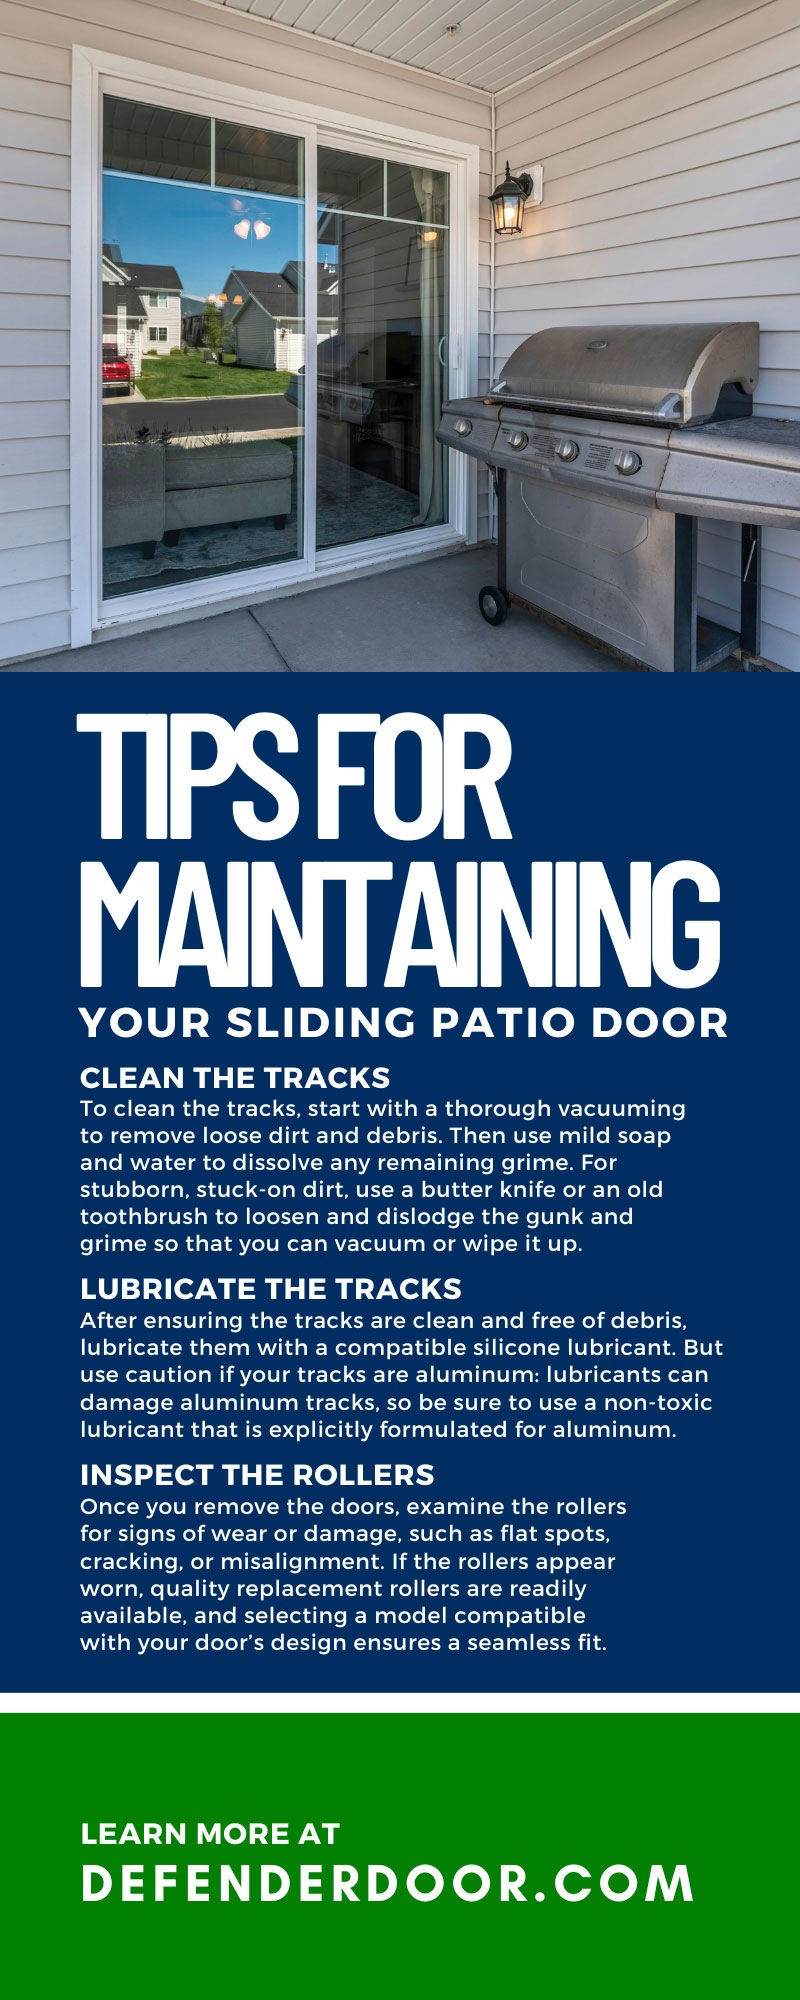 8 Tips for Maintaining Your Sliding Patio Door
